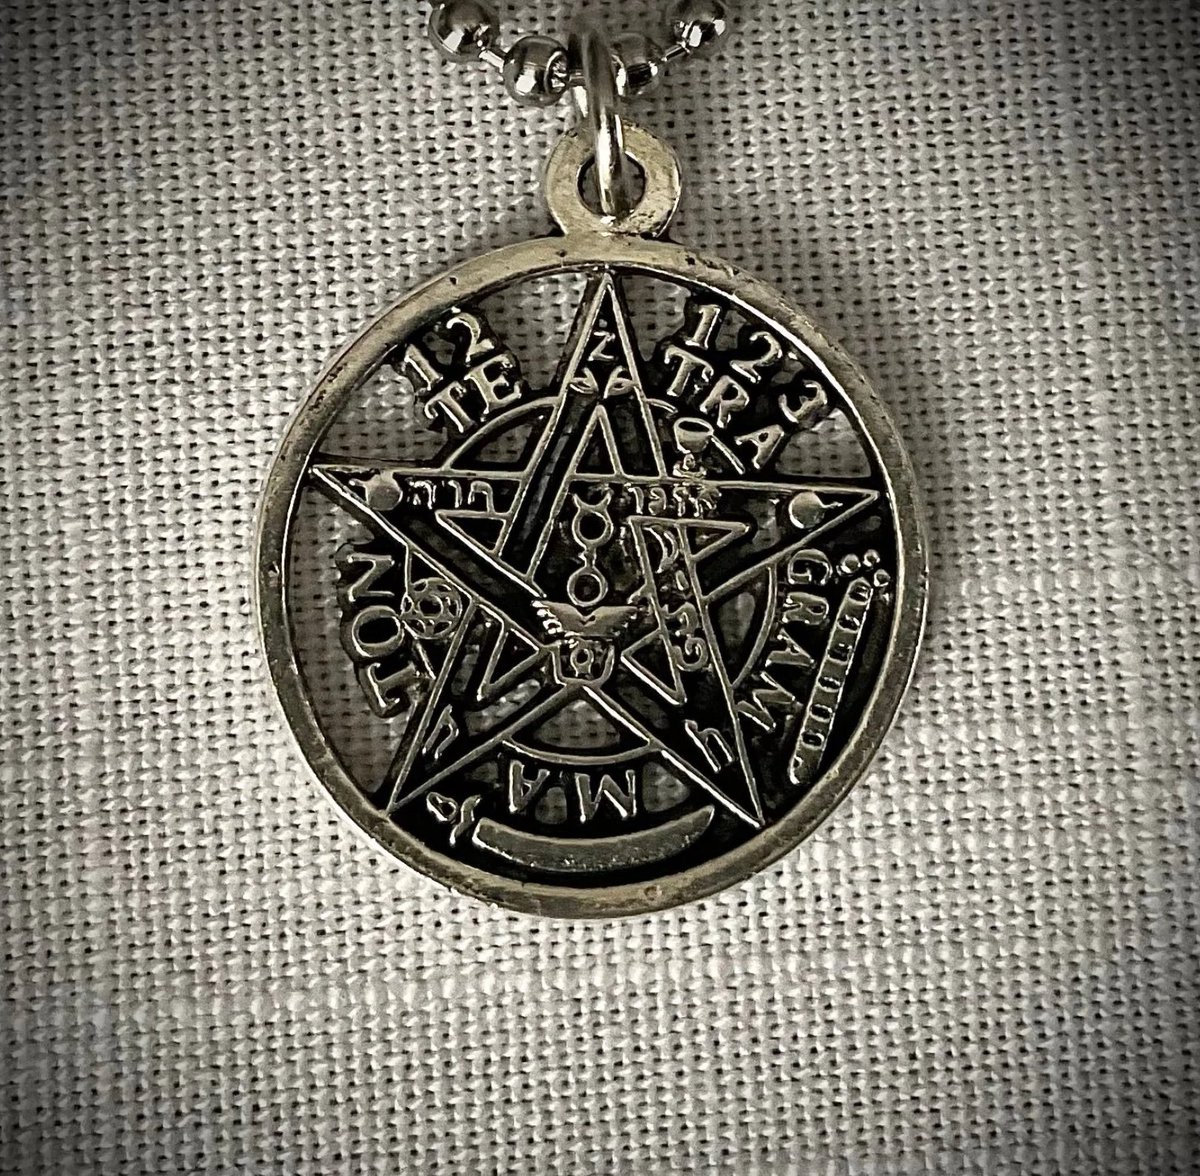 Pentagram Pendant in Silver Tone.  Blessed Be

#Witchcraft #Magick #Pagan #GoodMagick #WitchJoseph #Animism #FolkMagick
#HighMagick #CeremonialMagick #TraditionalWitchcraft #Wicca #Ritual #Ceremony #Goddess #Goetia #Theurgy #LHP #Hermetic #ChaosMagick #HedgeWitch #Thelema